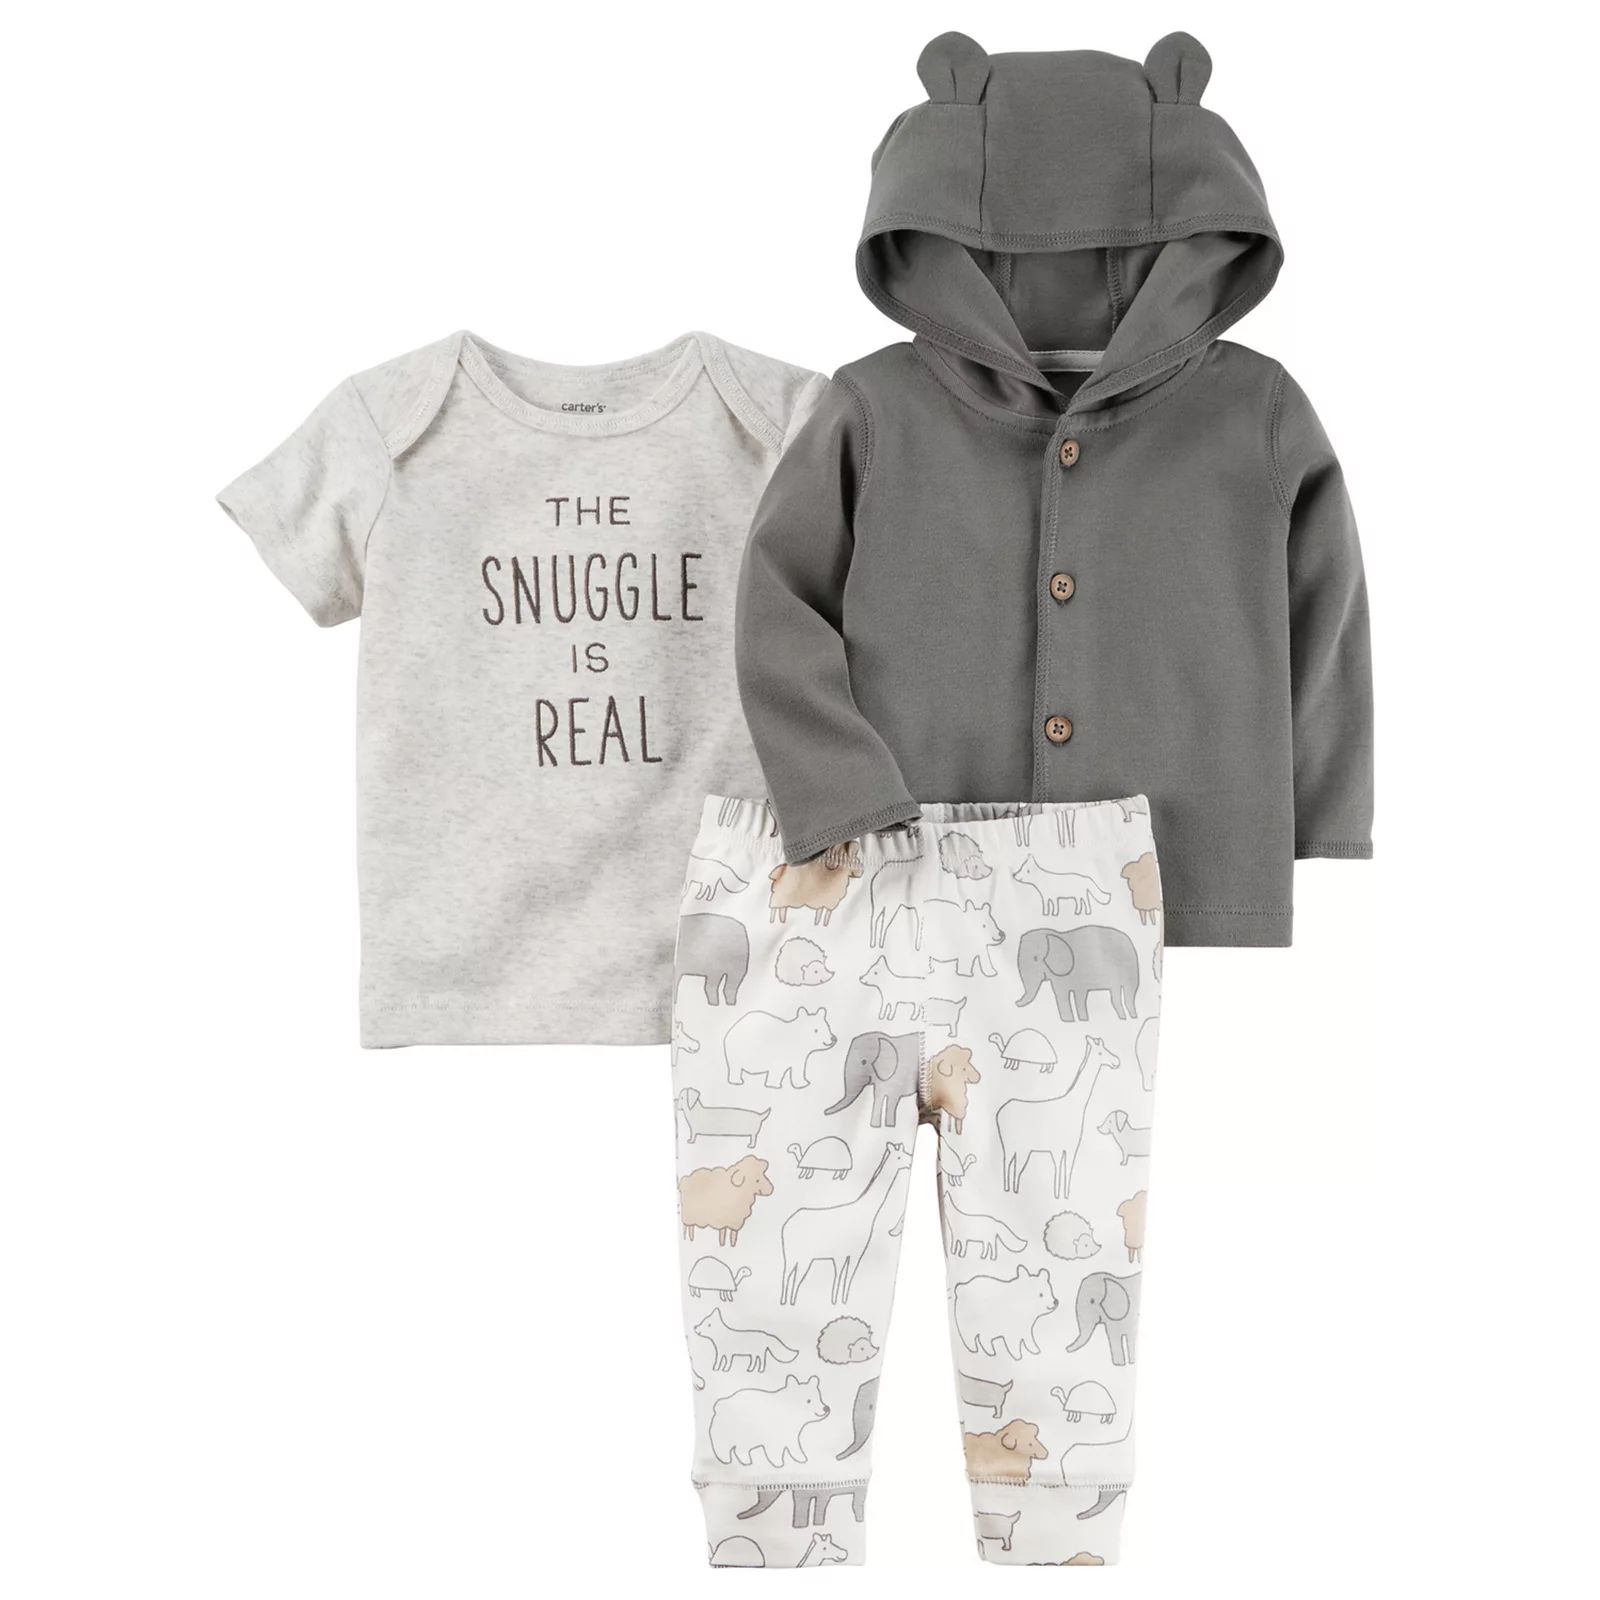 Baby Carter's "The Snuggle is Real" Tee, Hooded Cardigan & Animal Pants Set, Infant Unisex, Size: Newborn, Grey | Kohl's